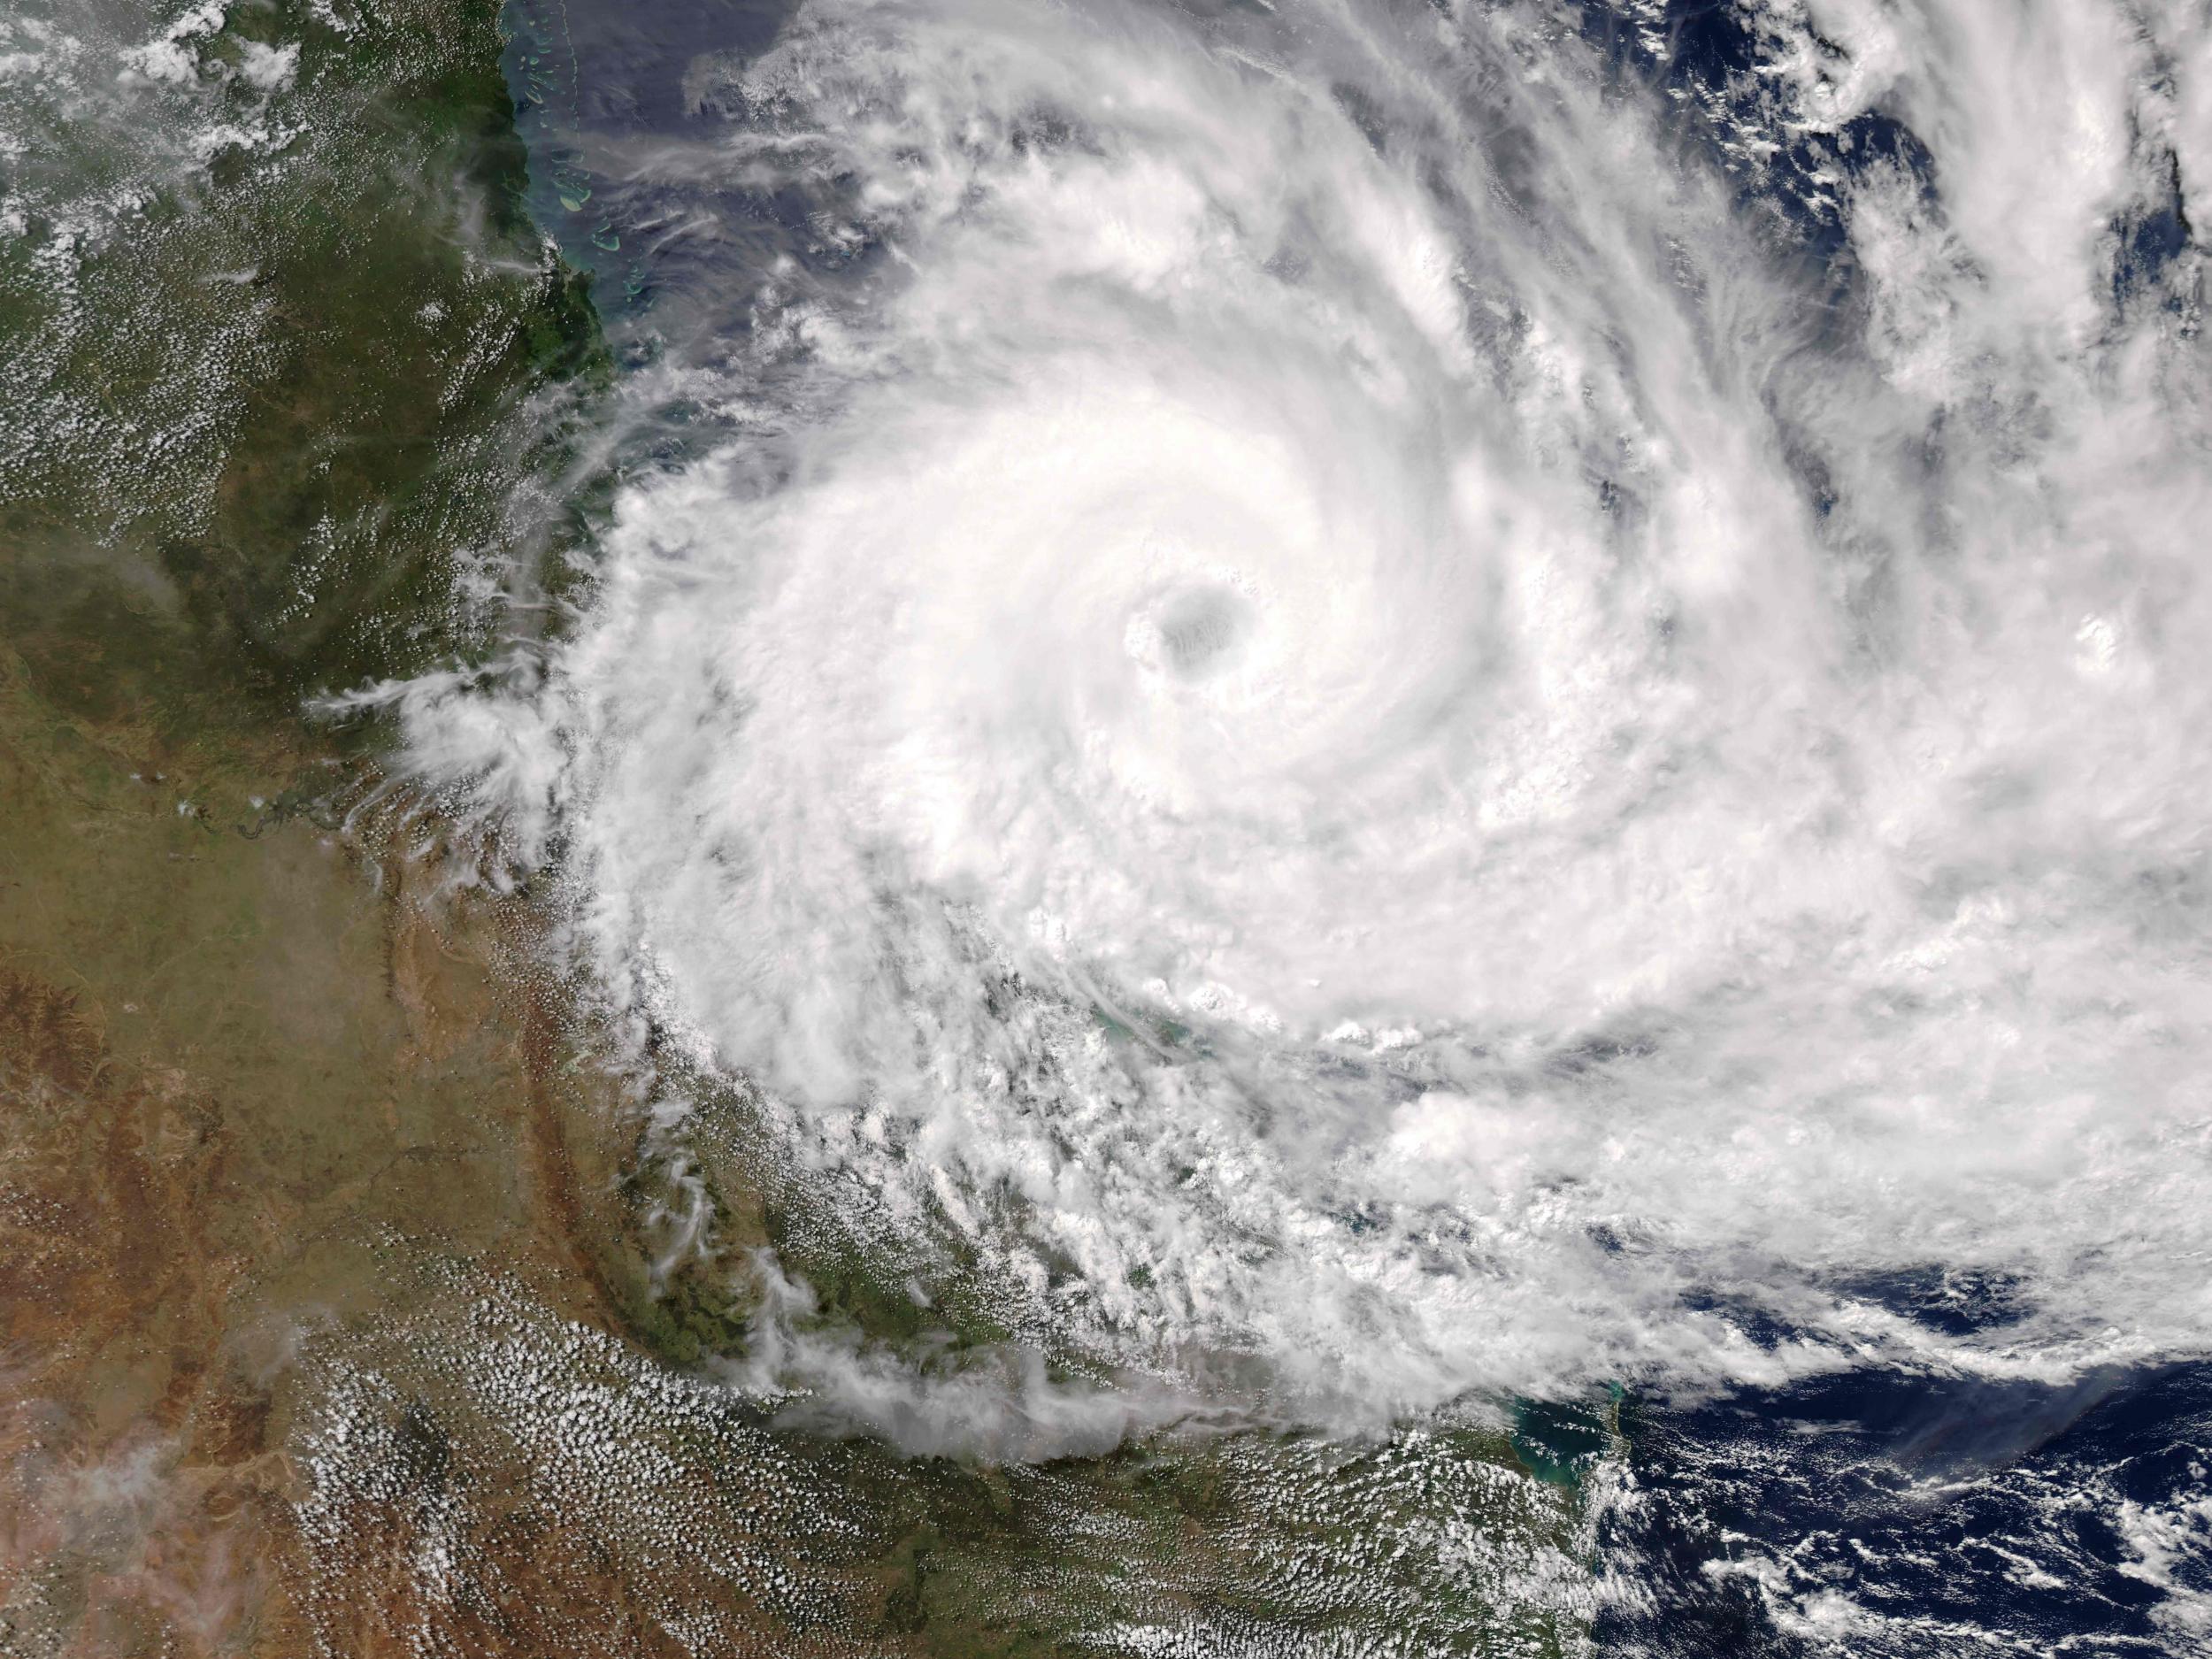 Photo shows a natural colour image captured by the Moderate Resolution Imaging Spectroradiometer on NASA's Aqua satellite of Cyclone Debbie approaching the coast of Queensland